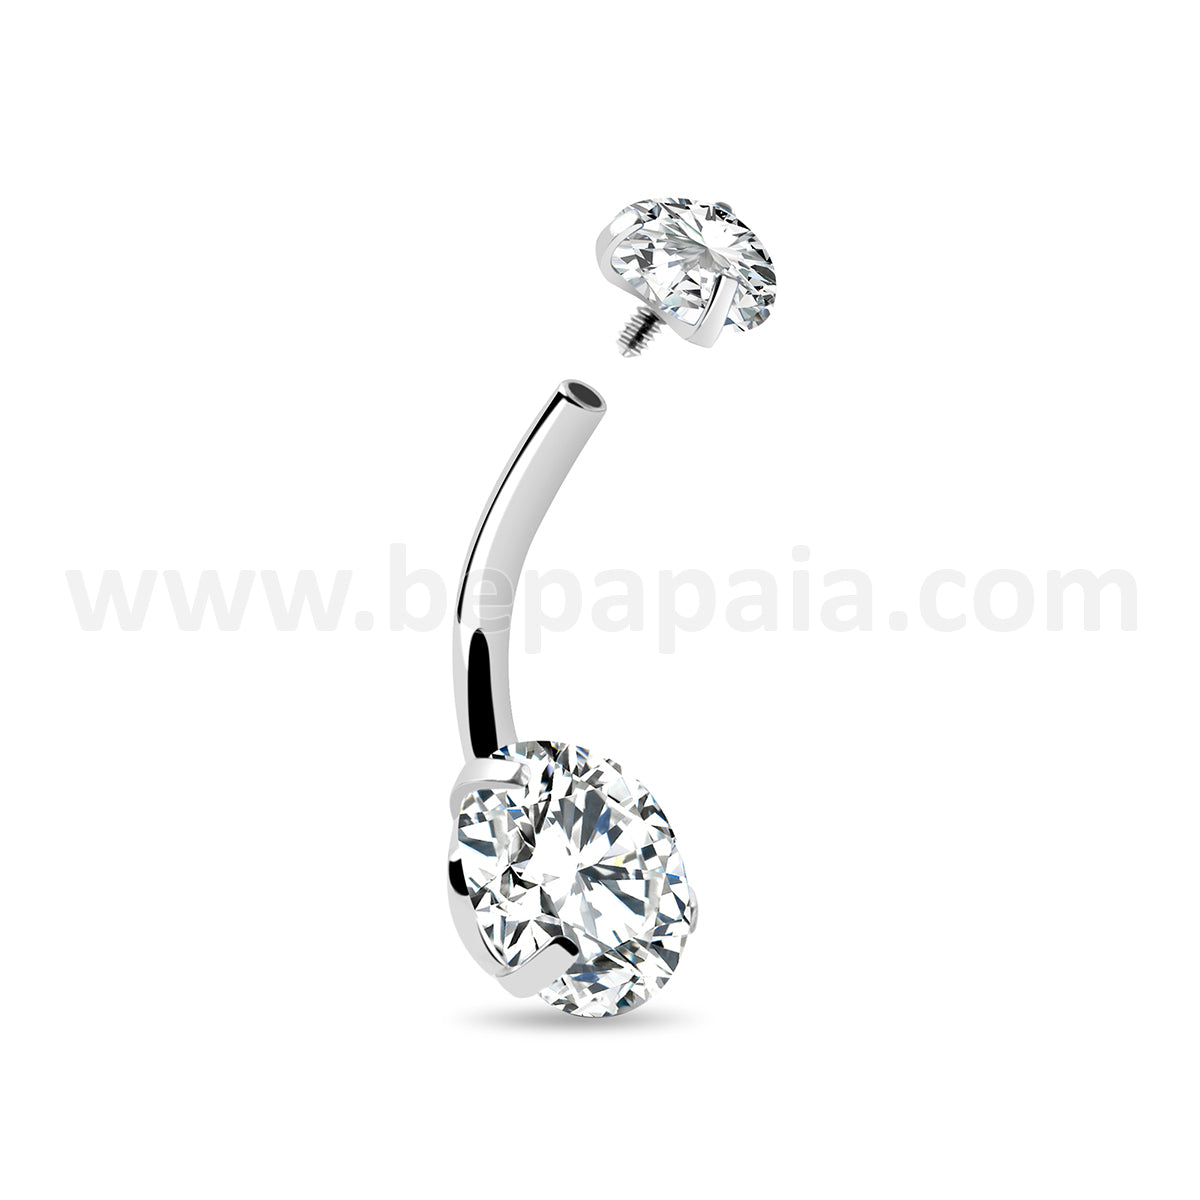 Surgical steel belly ring with gems